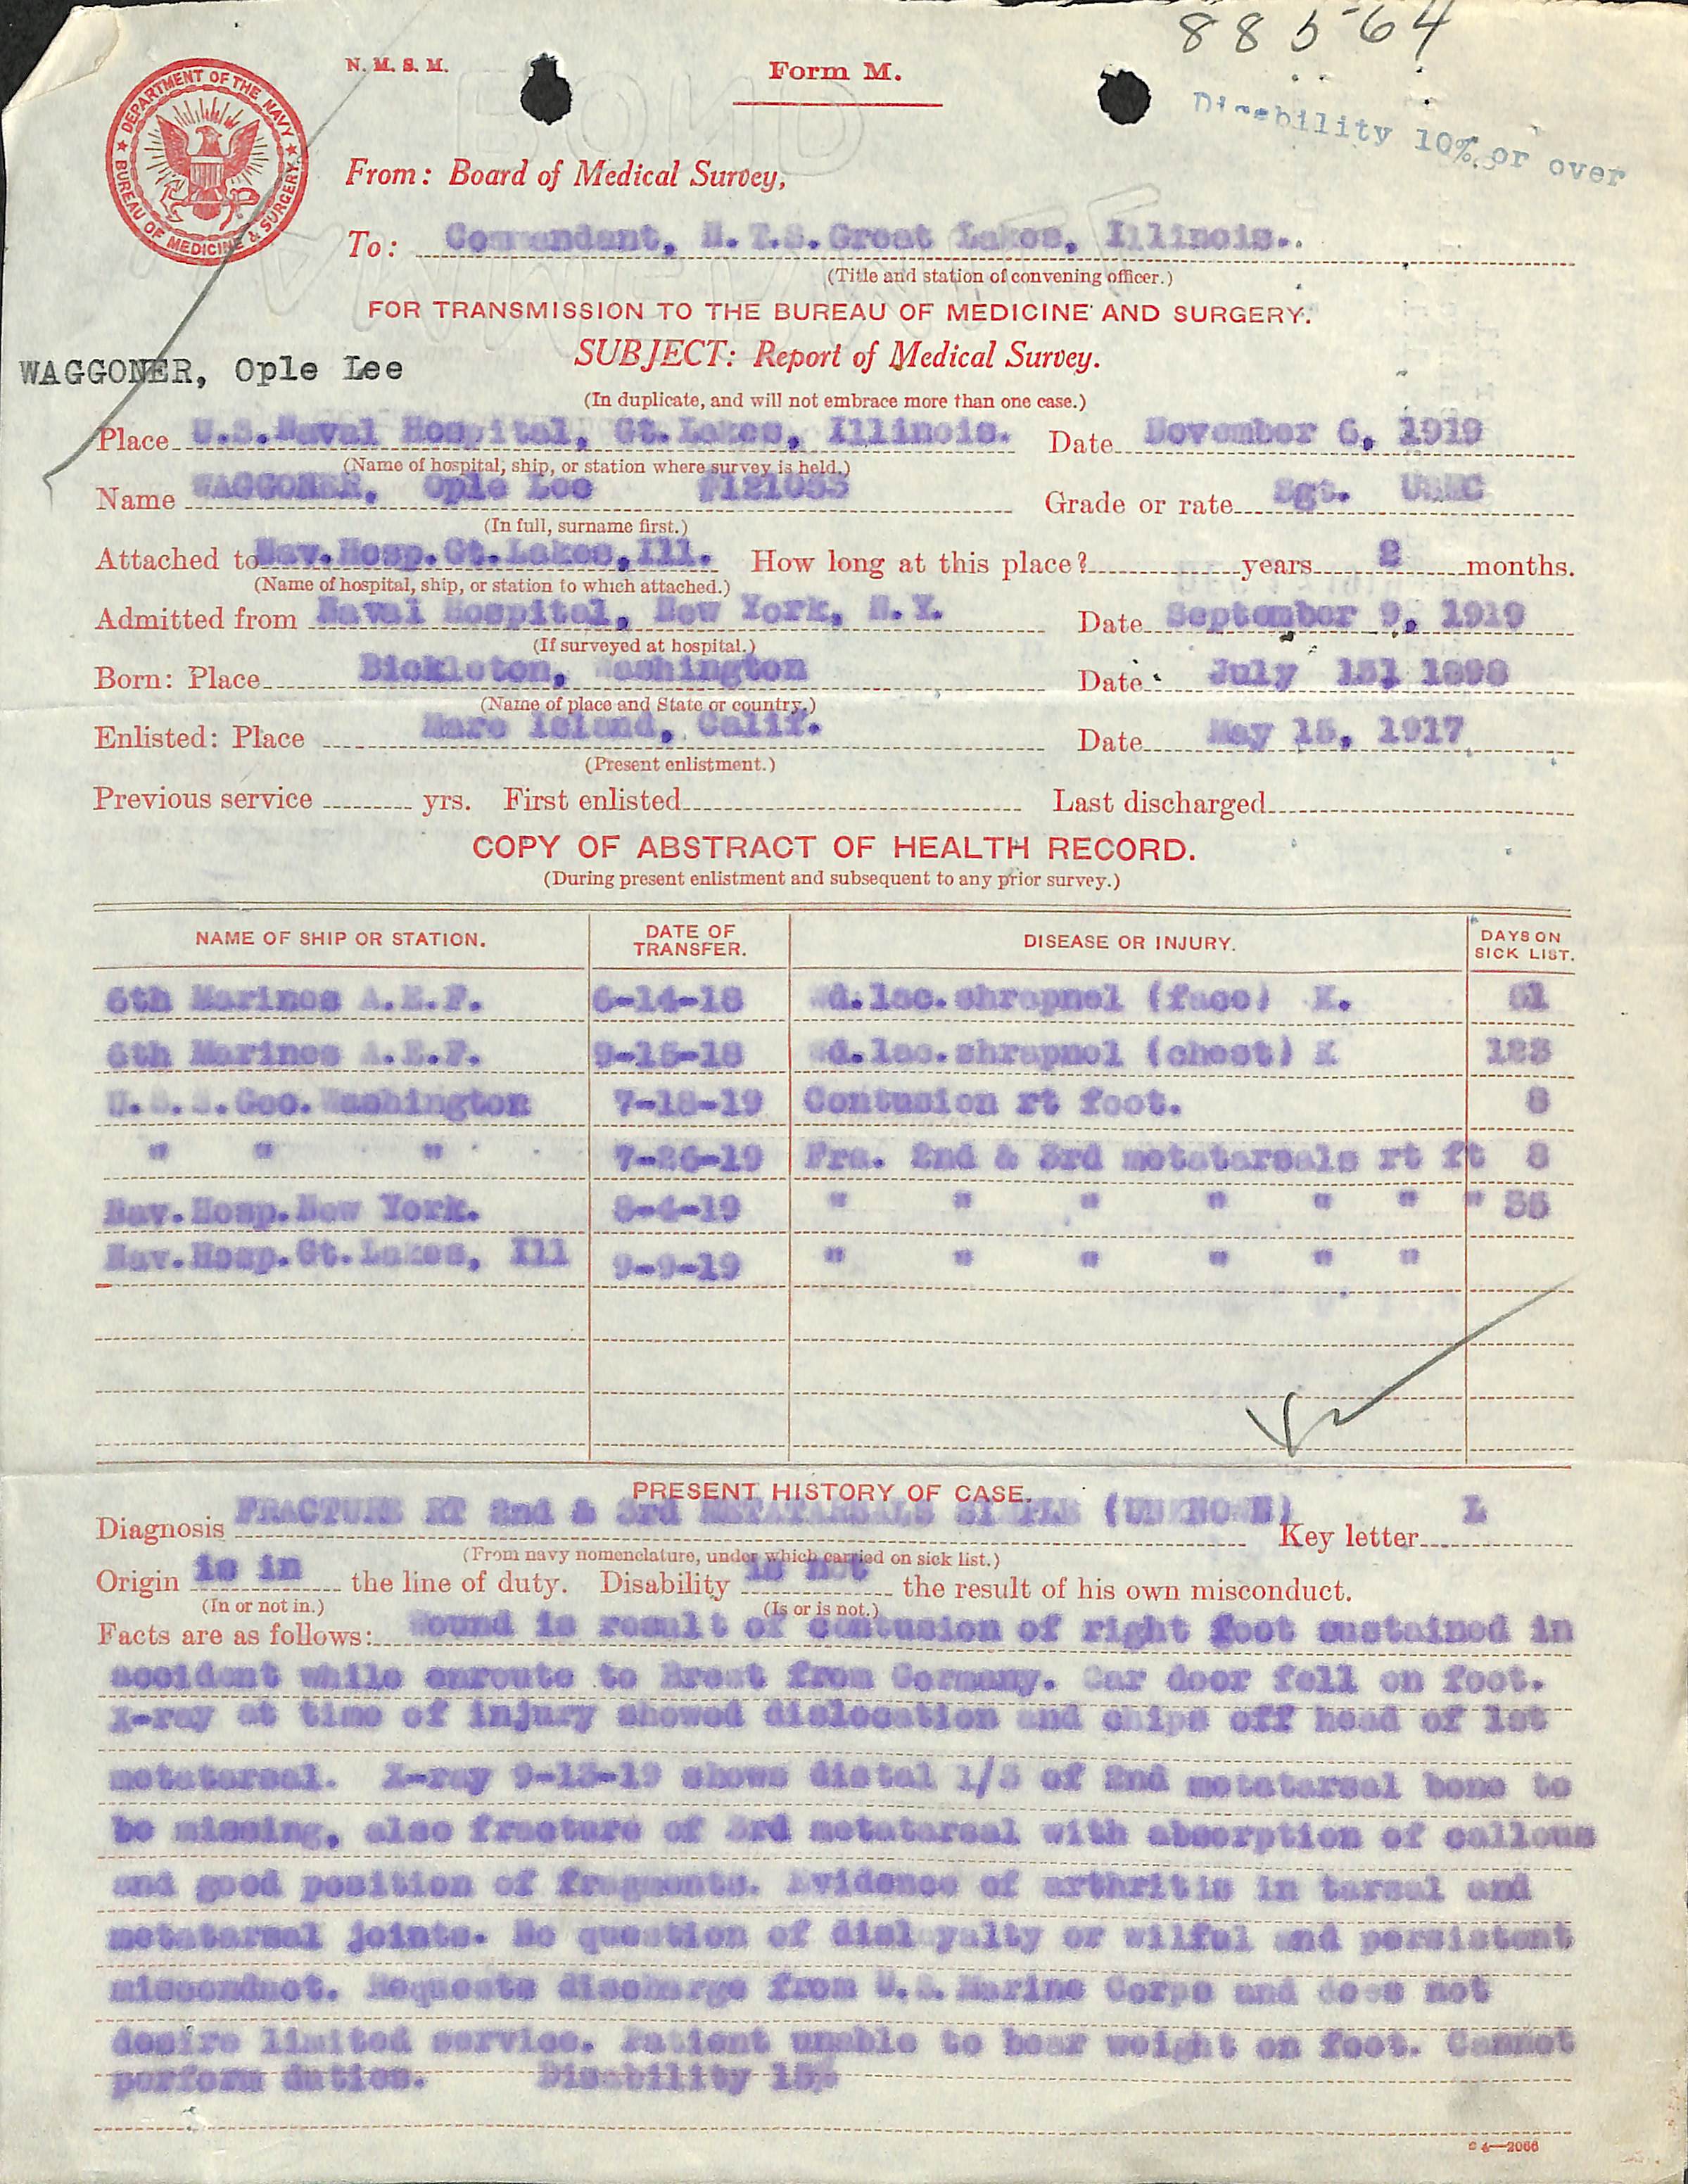 Medical records from WWI U.S.M.C. service record